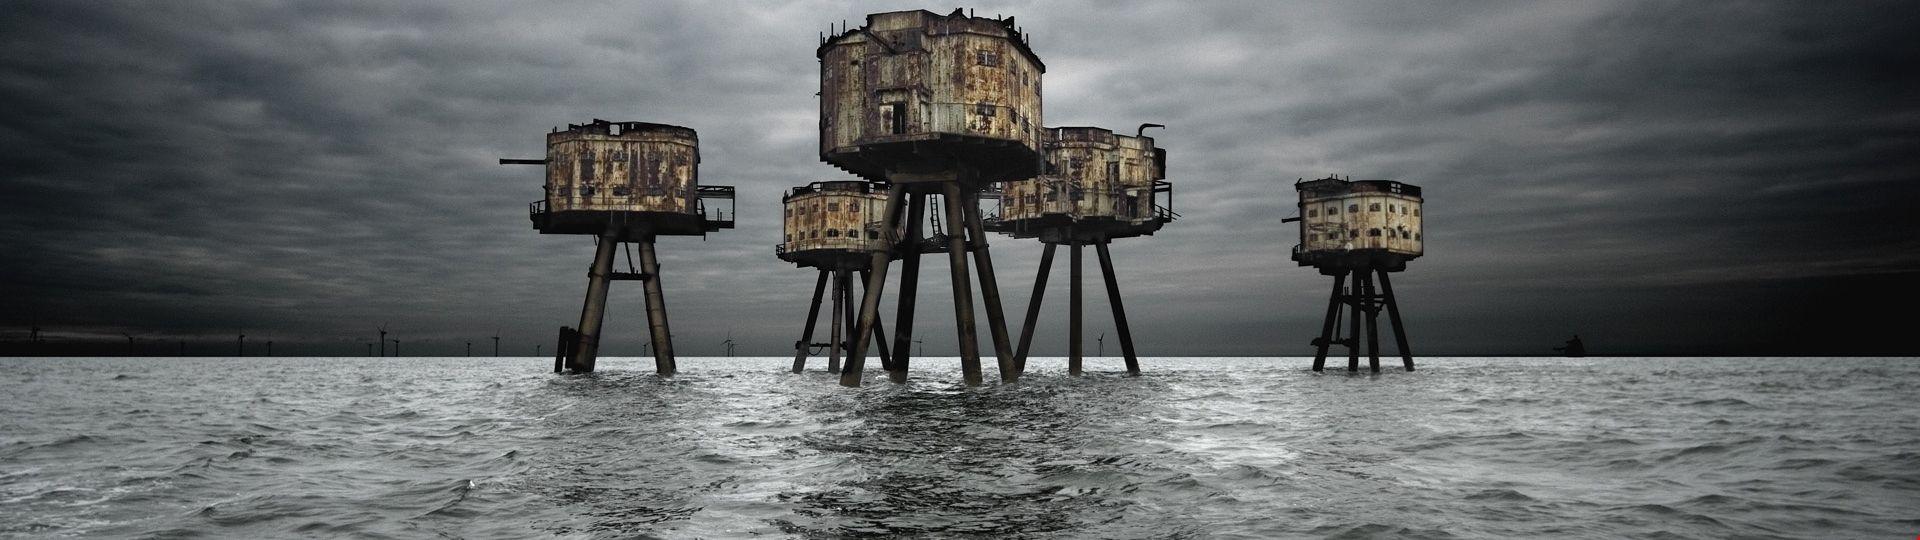 Maunsell Forts In The Thames Estuary, England Background